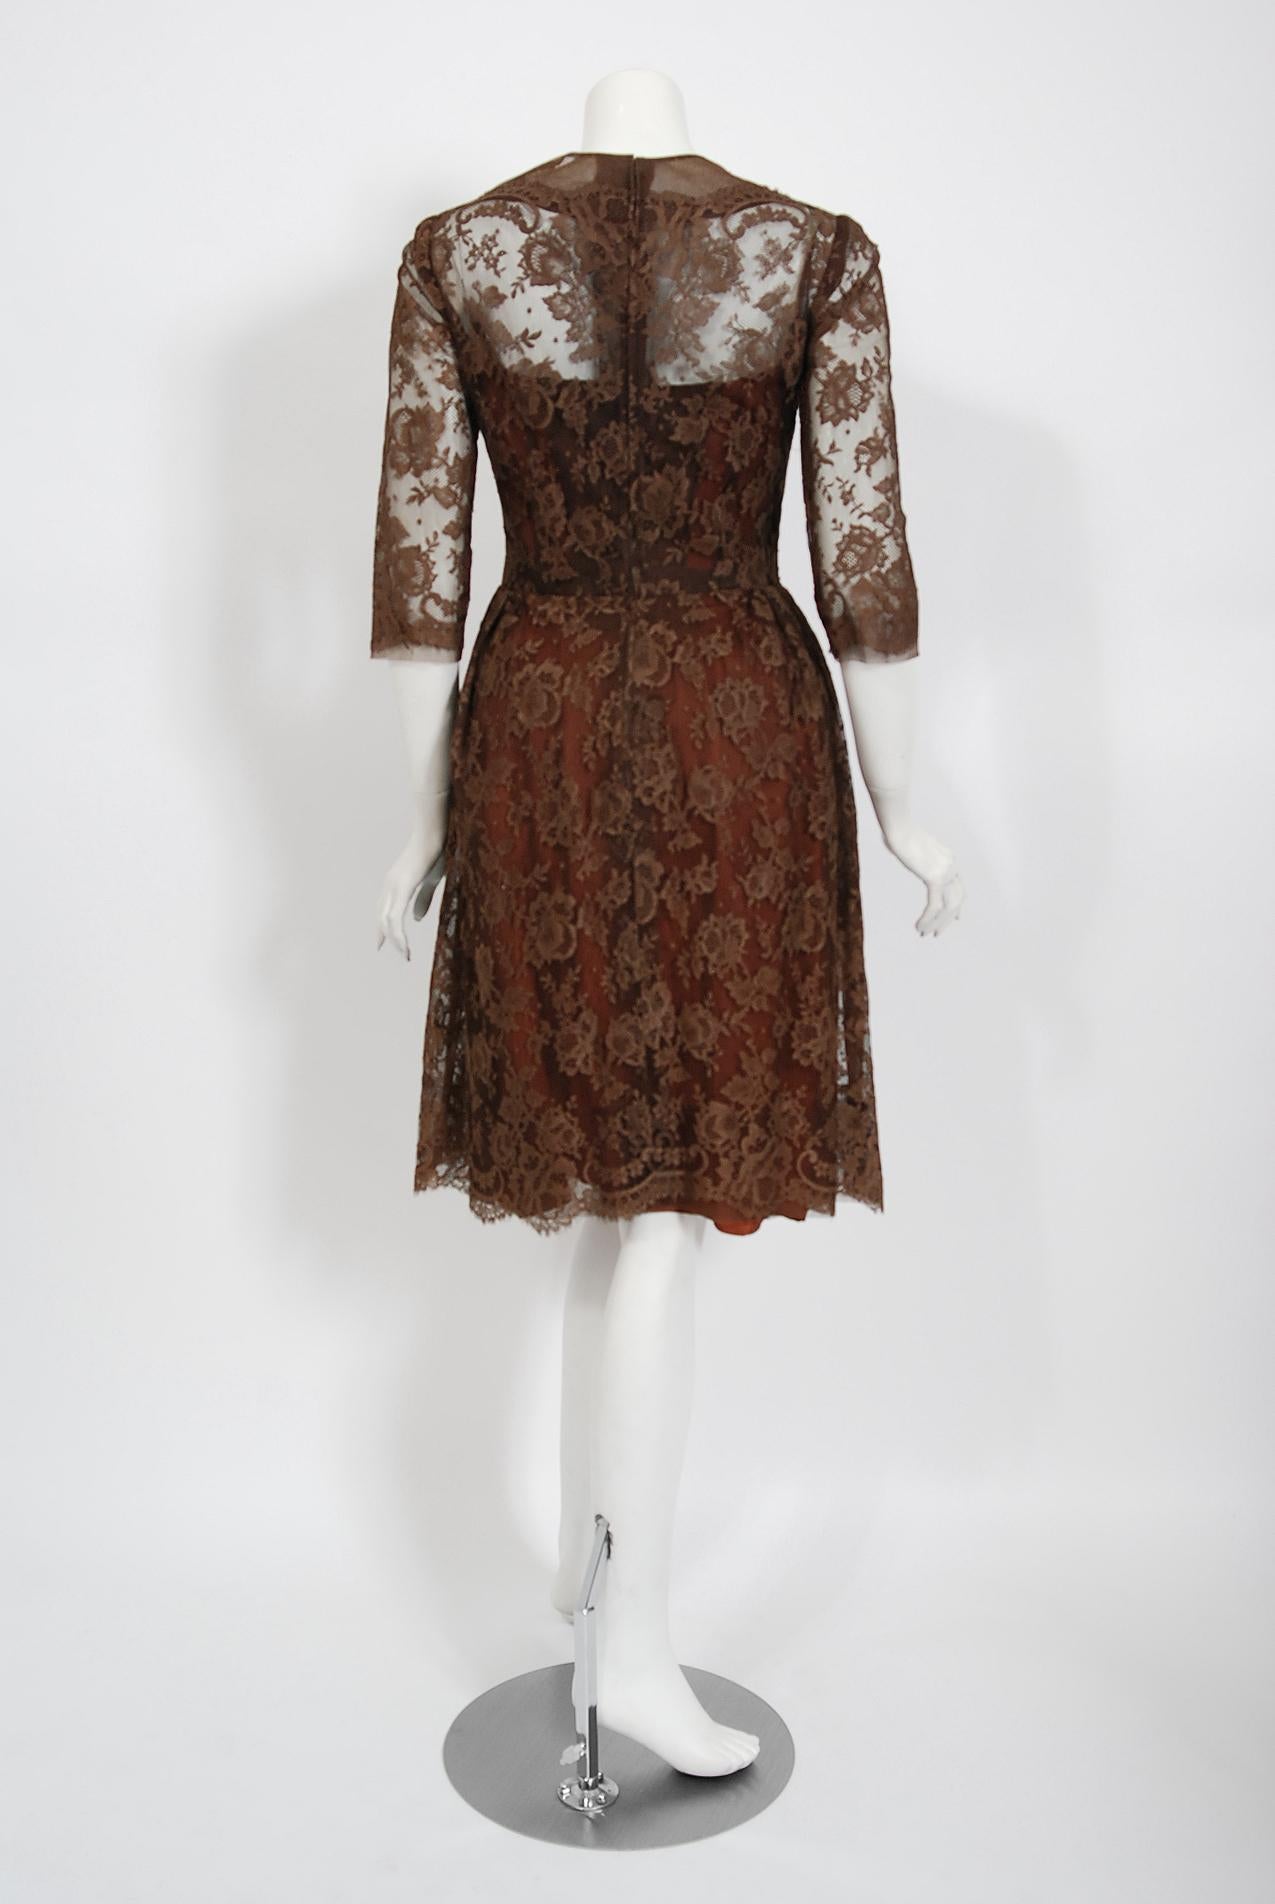 Black Vintage 1955 Maggy Rouff Haute Couture Brown Sheer Illusion Chantilly Lace Dress